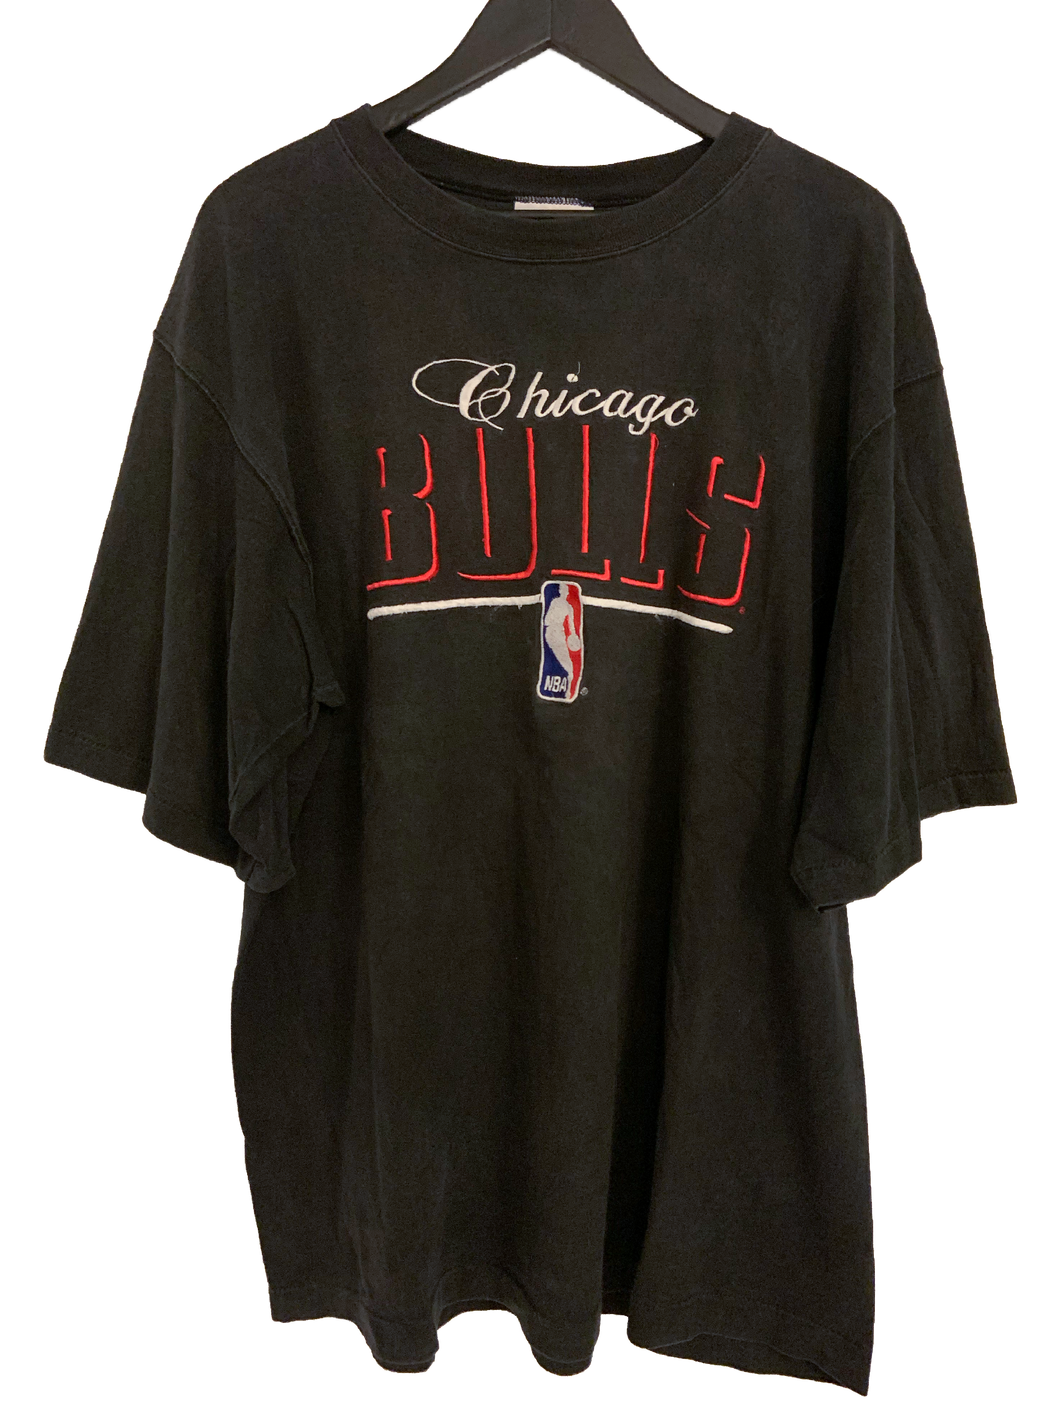 VINTAGE CHICAGO BULLS EMBRIODERED 'SS' TEE - XL